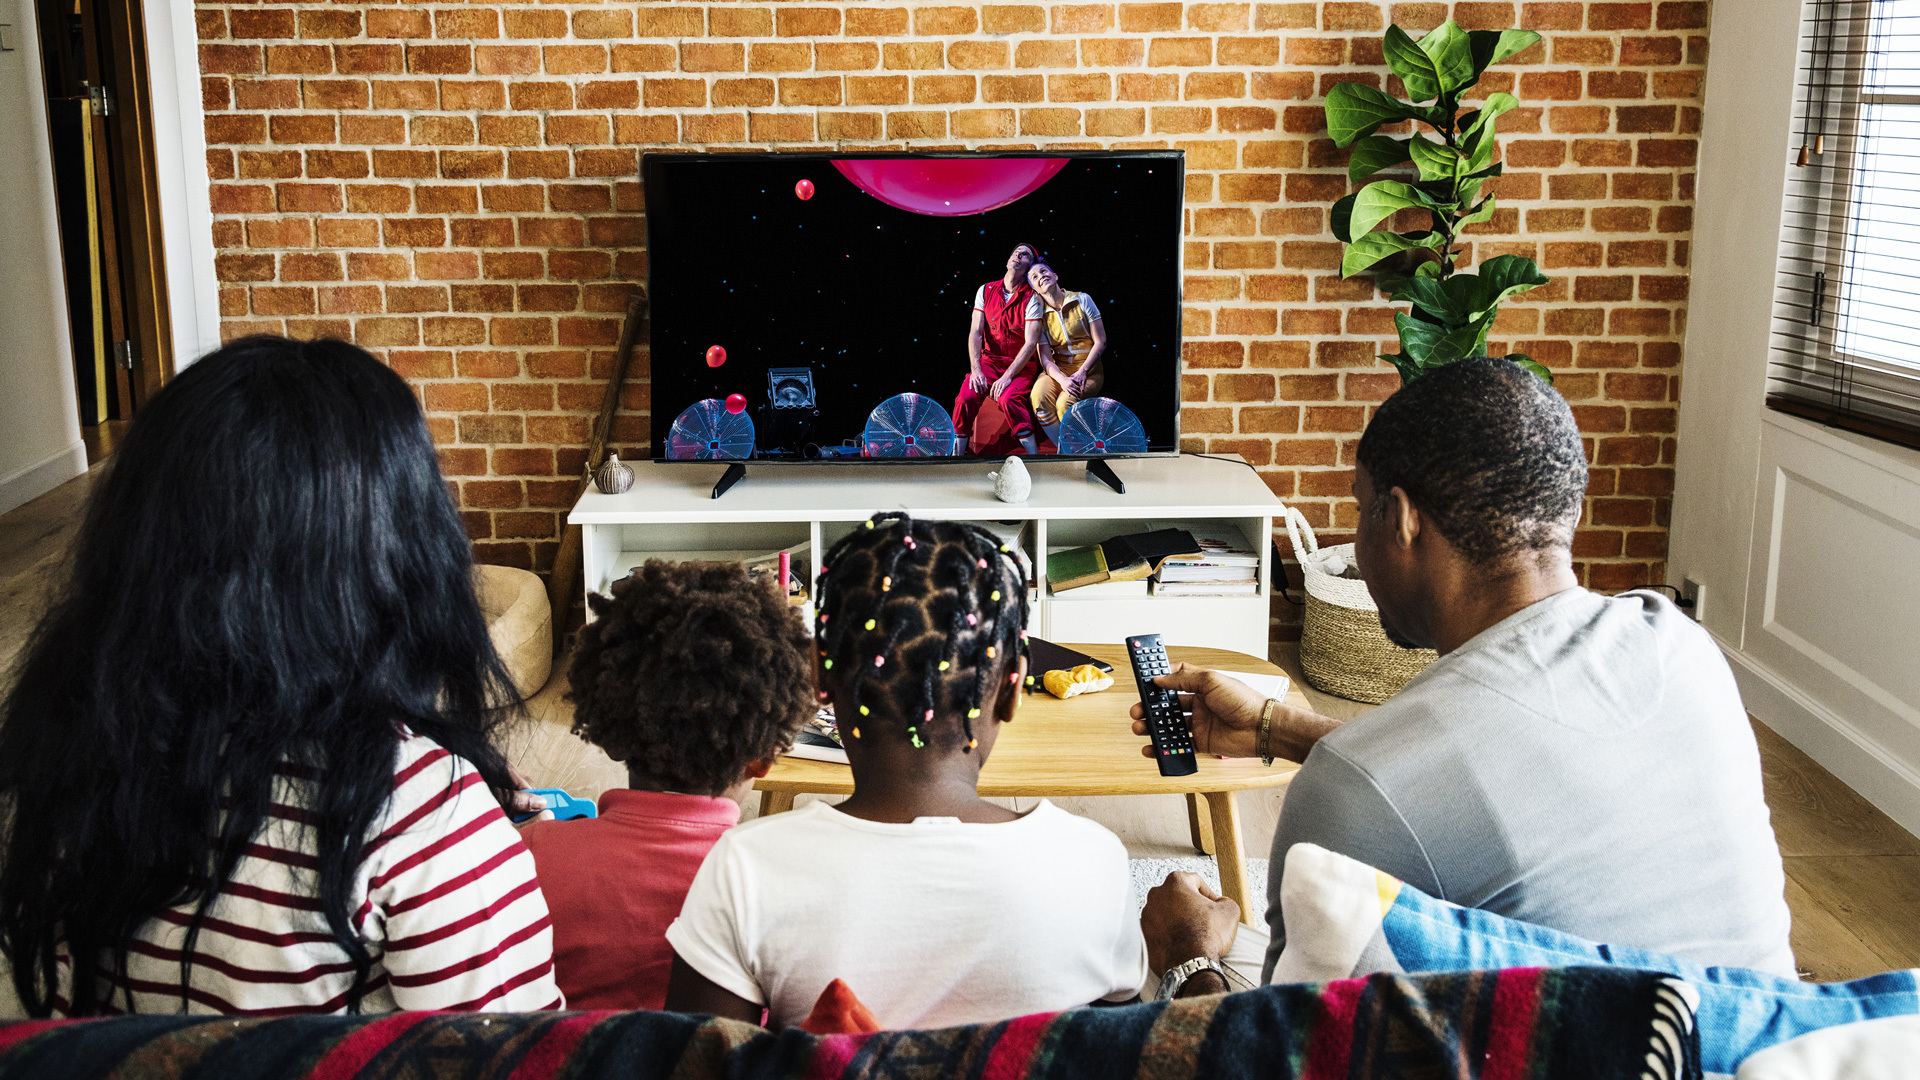 Two parents and two kids sit on a couch watching a performance of Air Play stream on their TV.